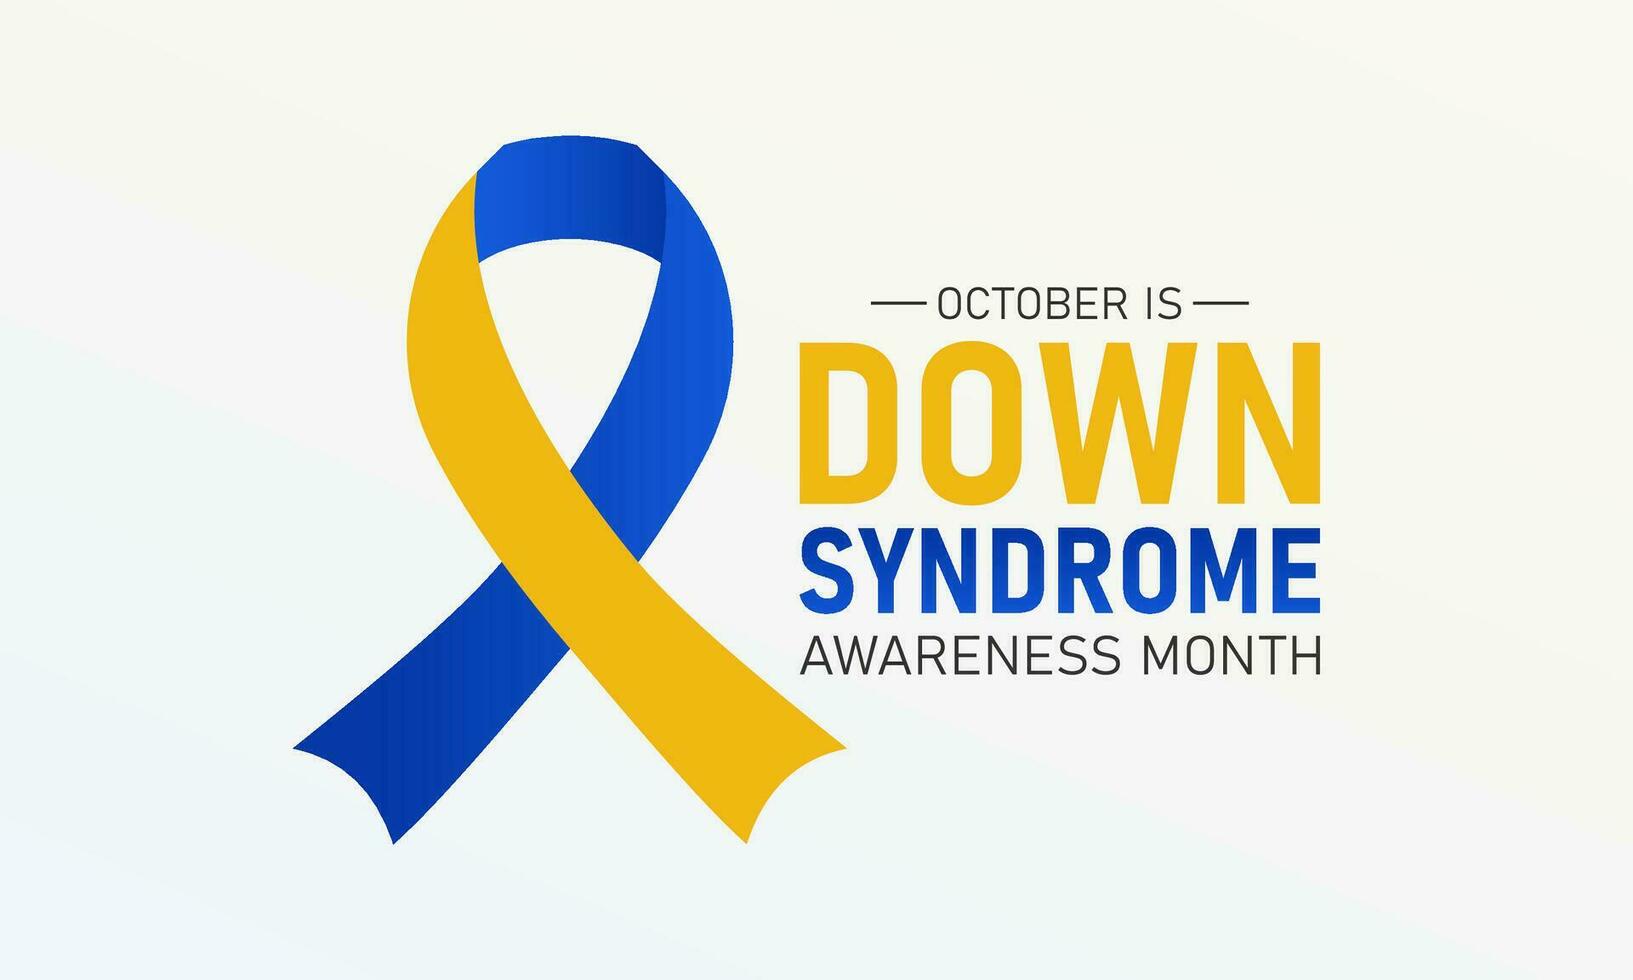 Down syndrome awareness month is observed every year in october. October is down syndrome awareness month. Vector template for banner, greeting card, poster with background. Vector illustration.